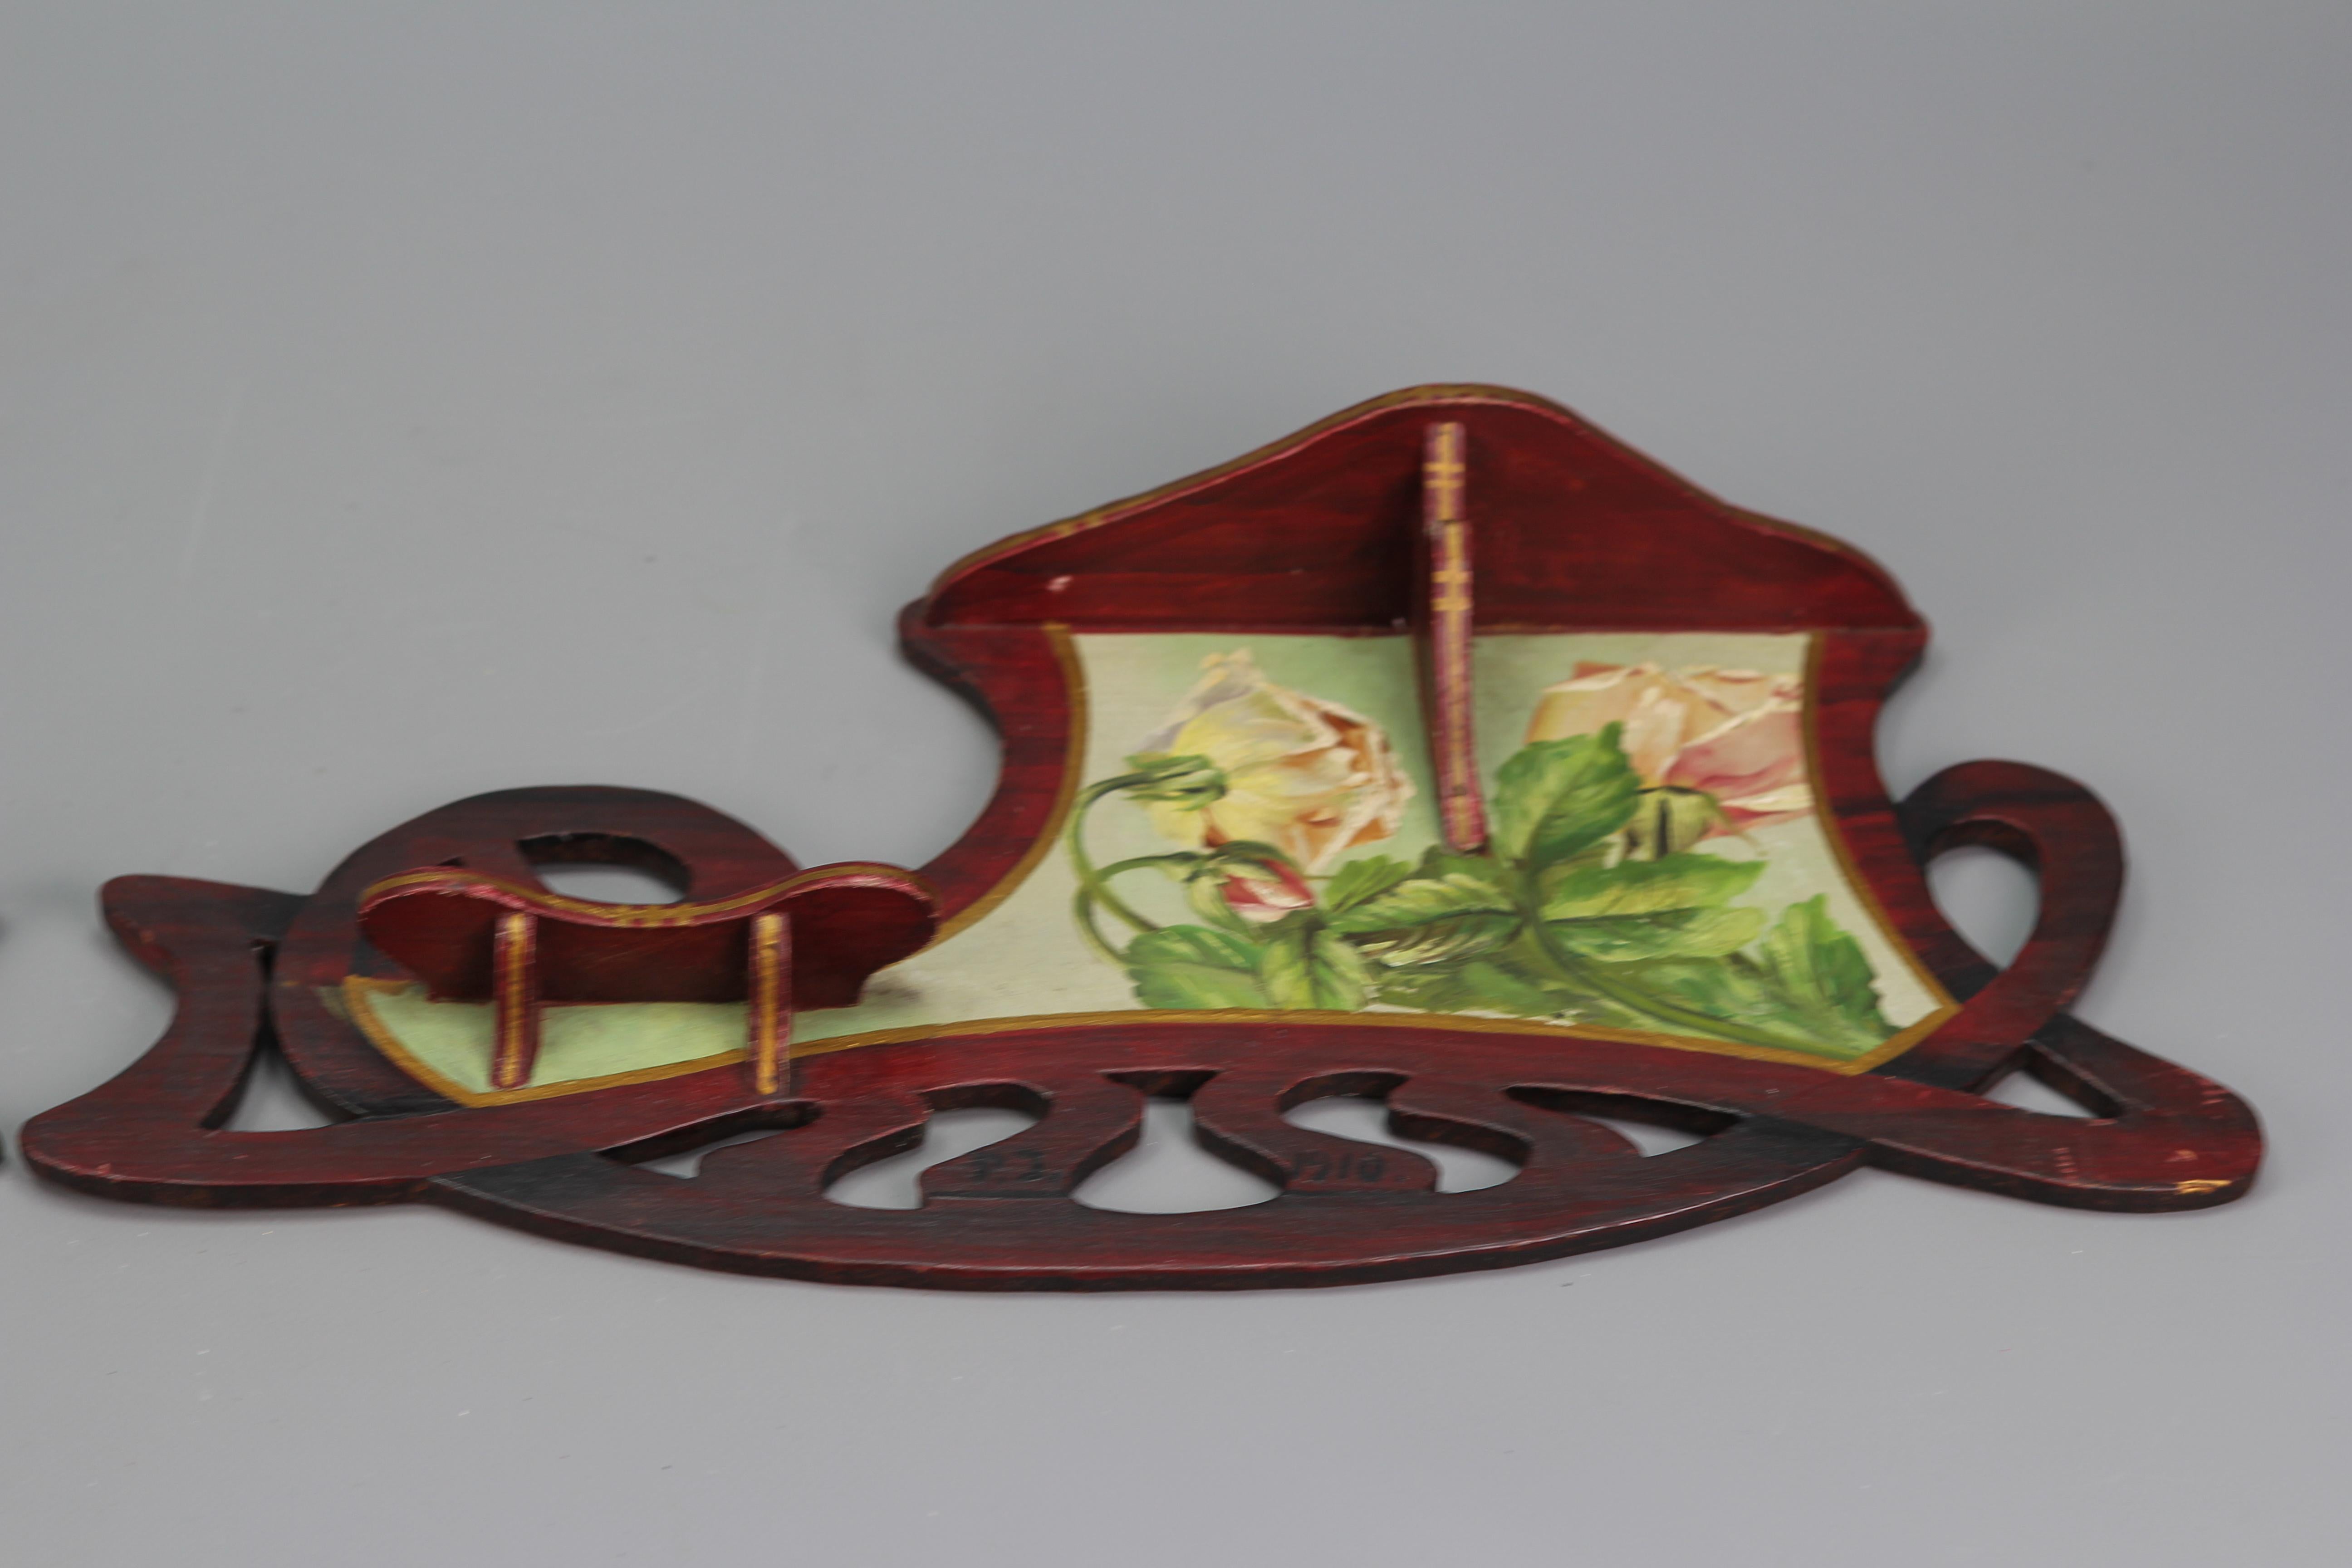 Pair of Art Nouveau Wooden Hand-Painted Floral Shelves, Germany, 1910 For Sale 5